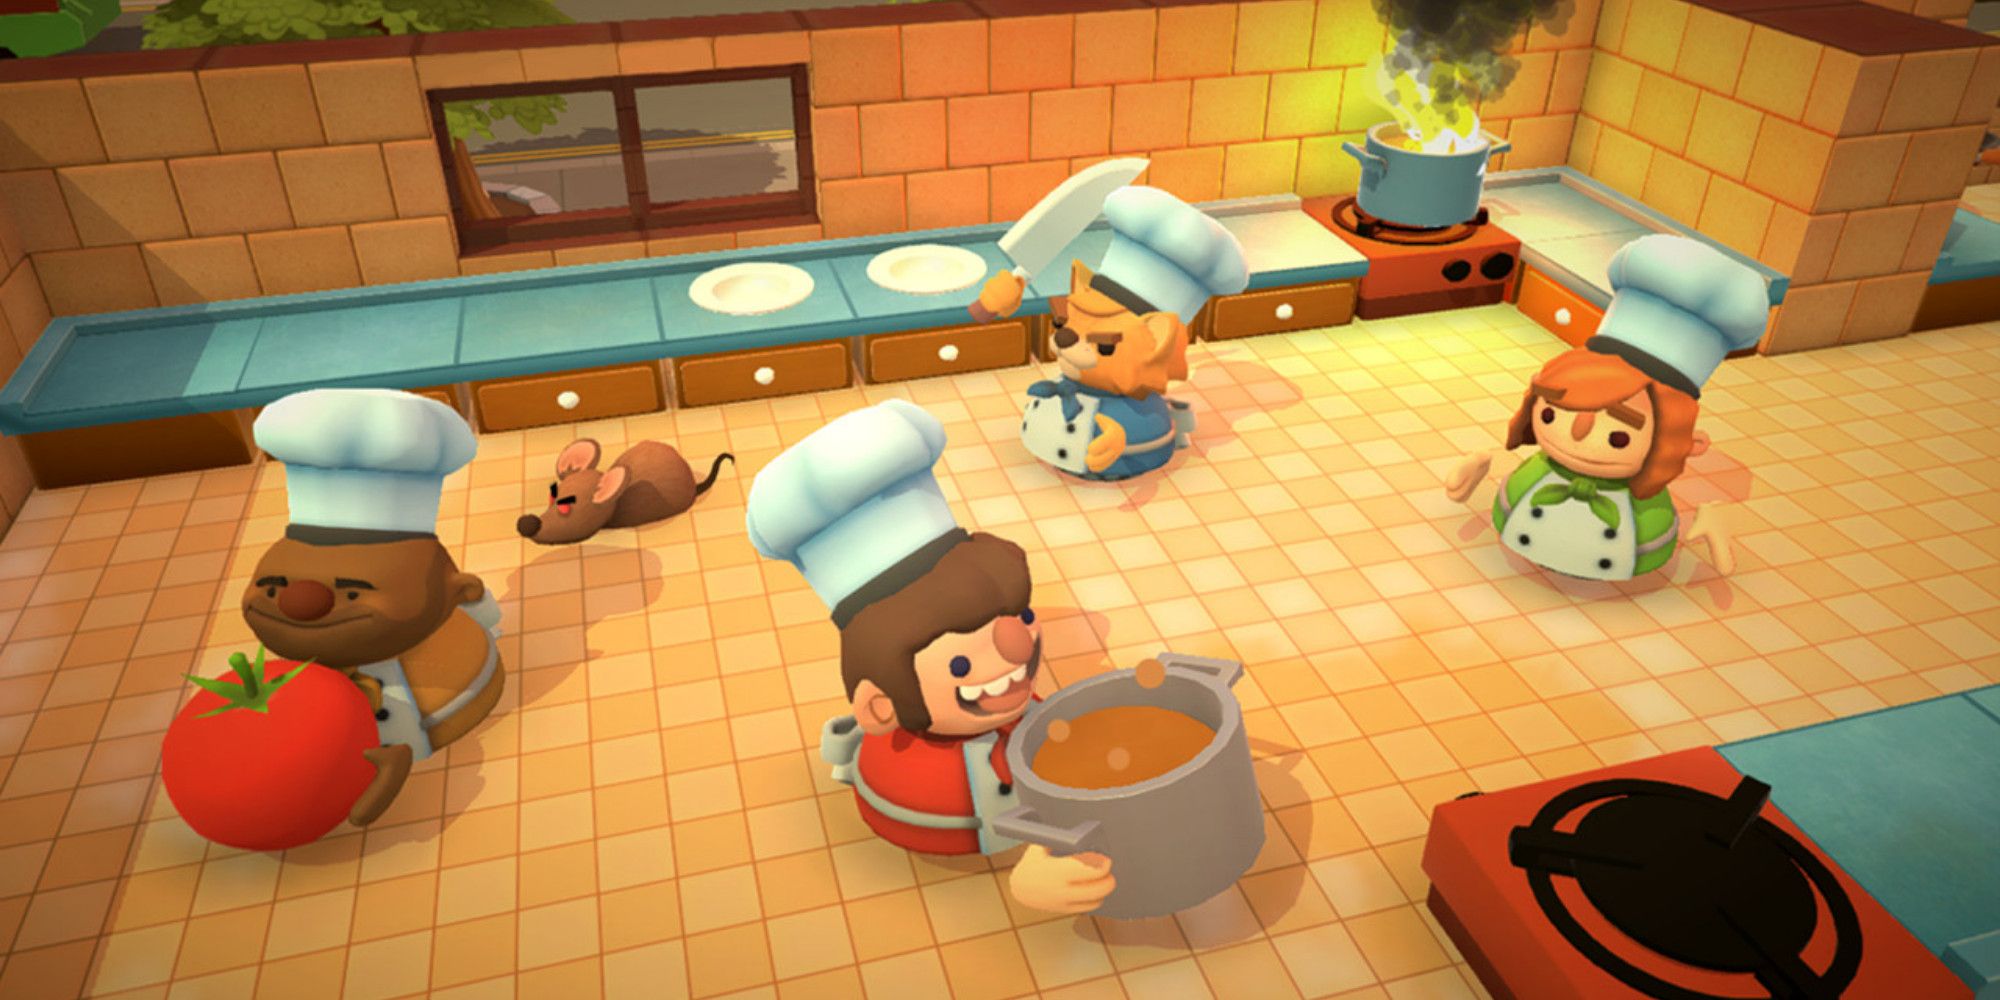 Chef preparing food with overcooked